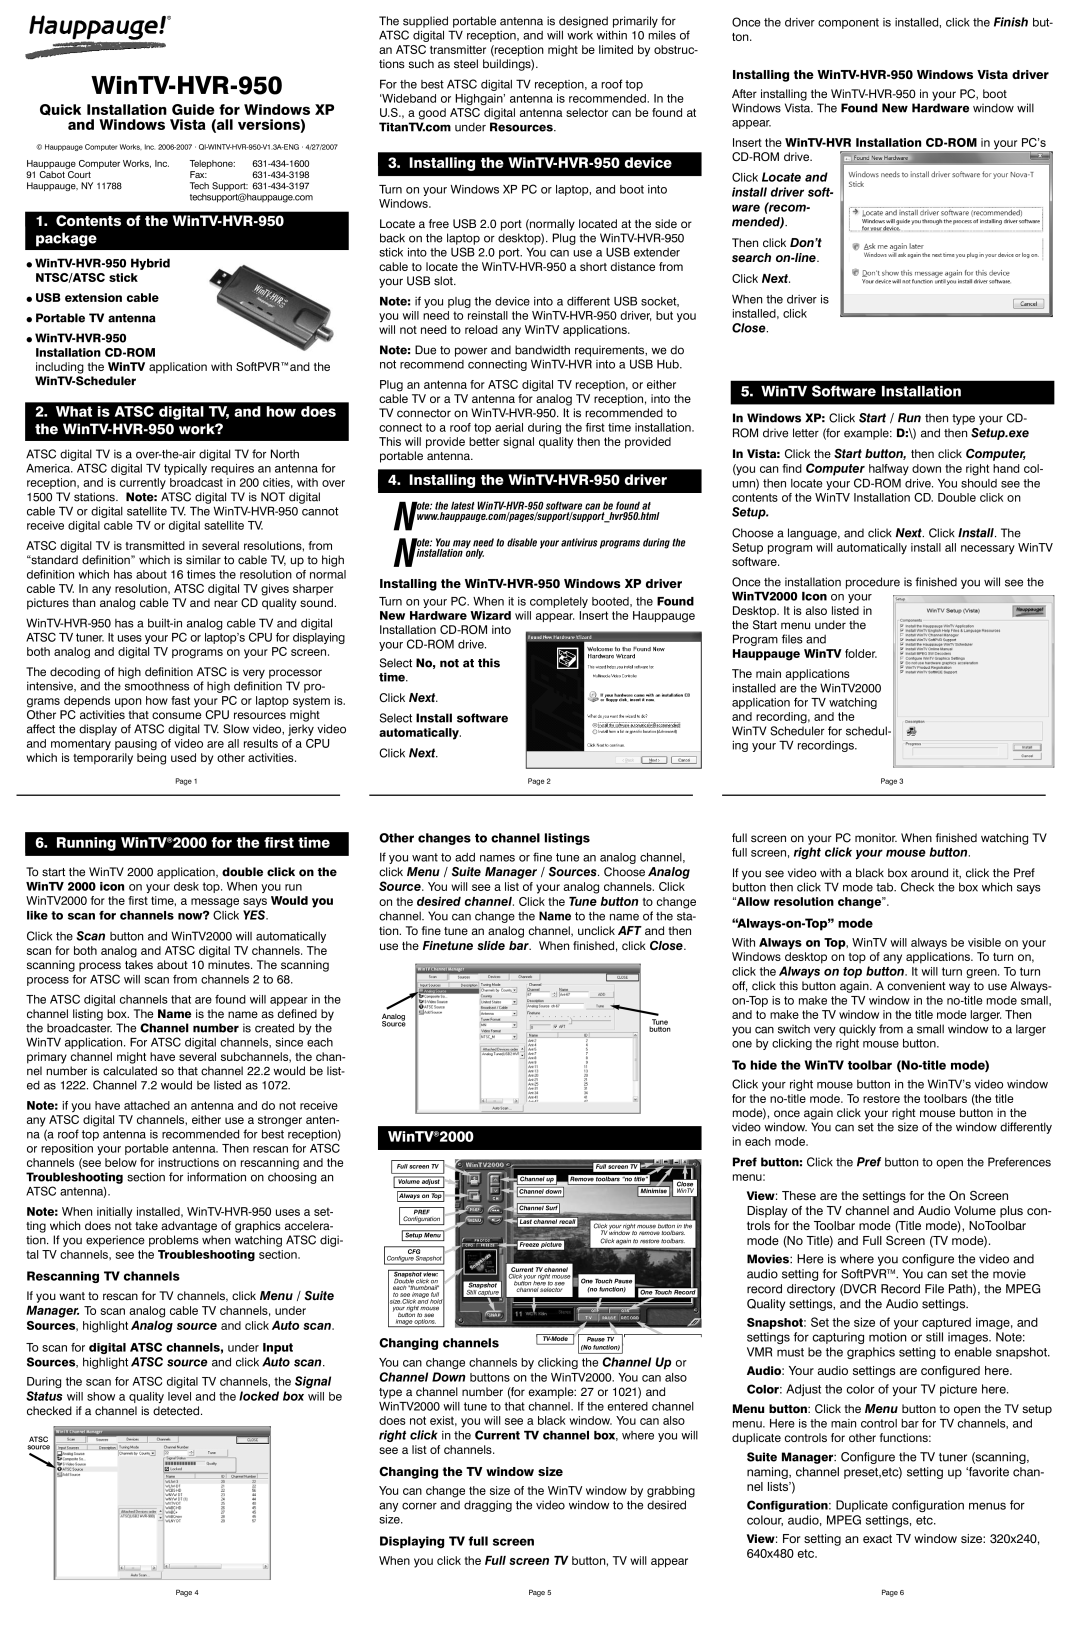 Hauppauge manual Contents of the WinTV-HVR-950 package, What is ATSC digital TV, and how does the WinTV-HVR-950 work? 